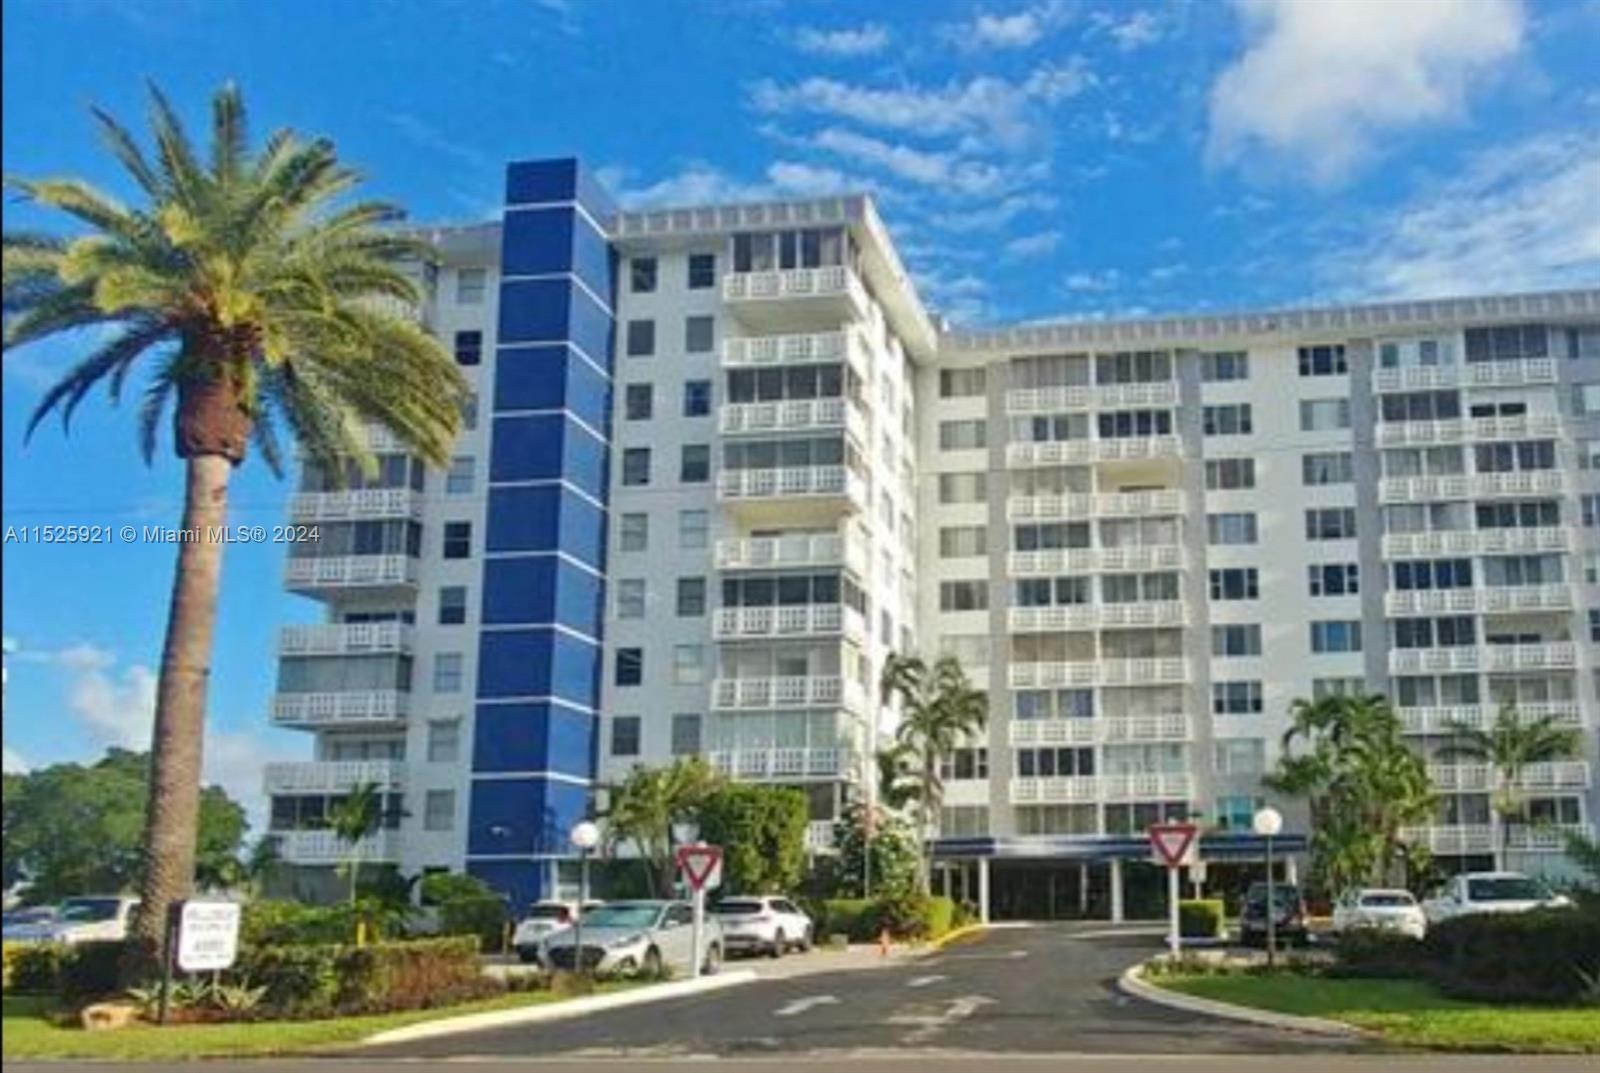 Photo of 4350 Hillcrest Dr #715 in Hollywood, FL